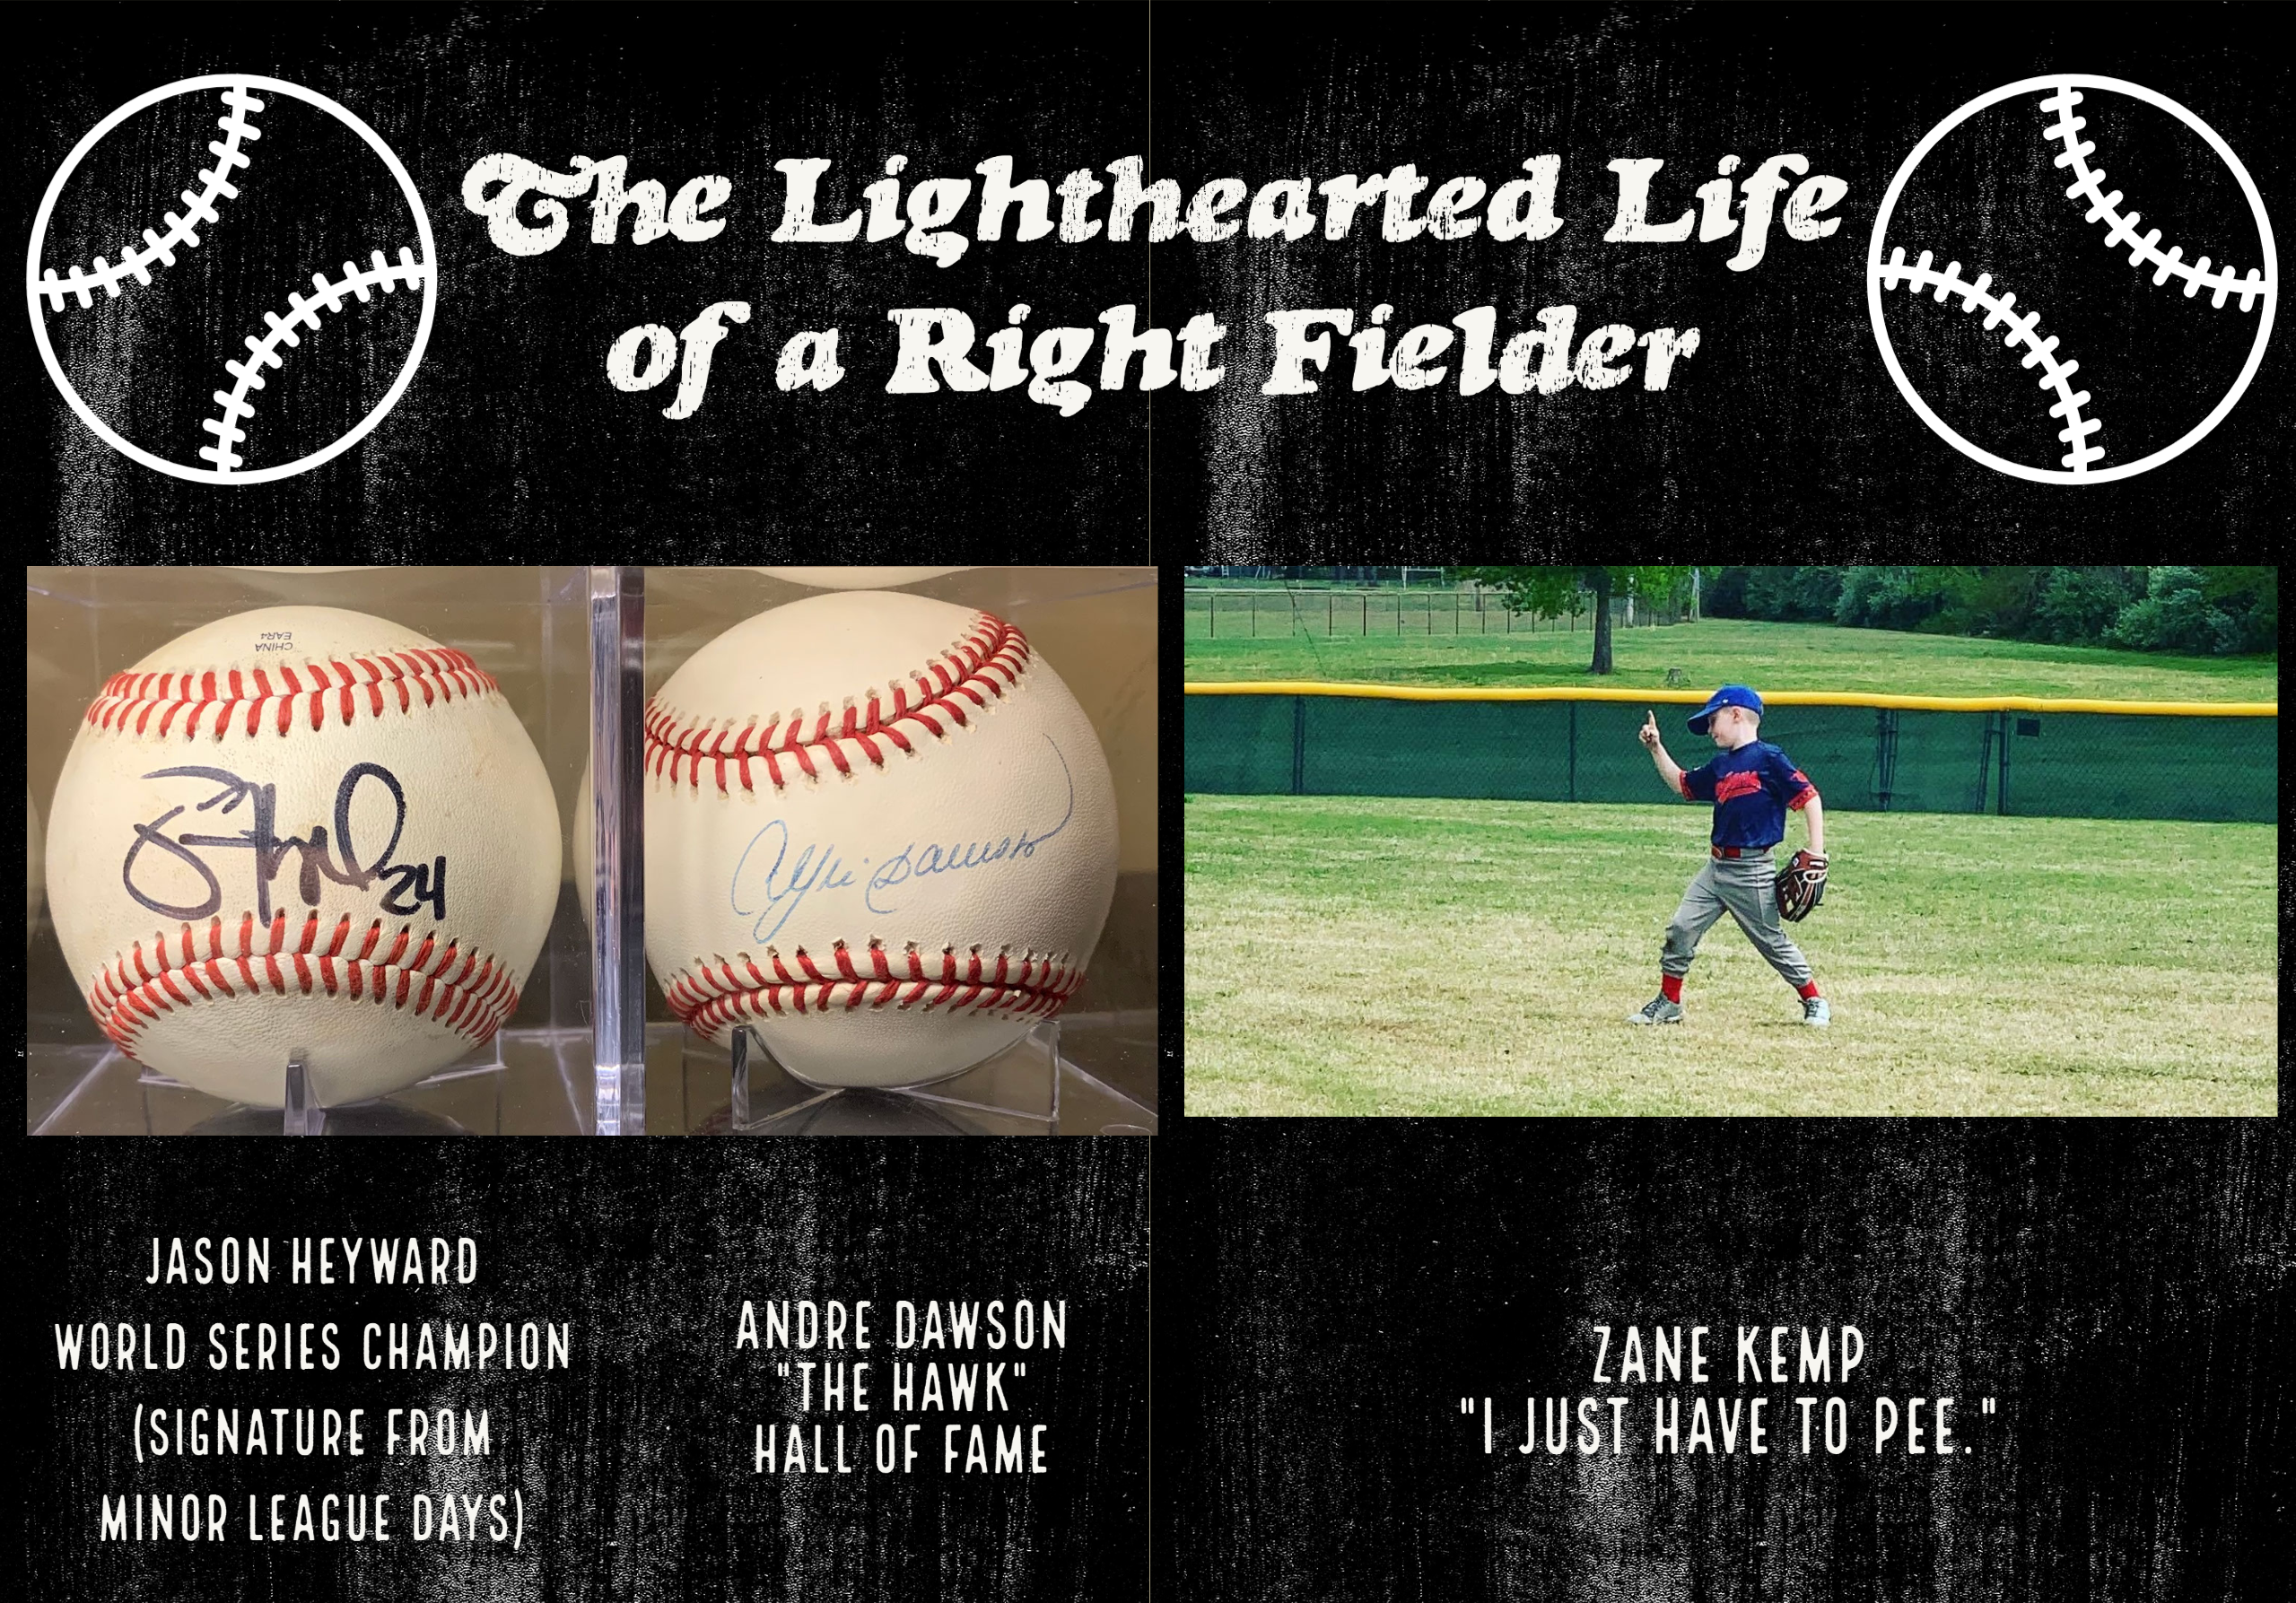 The Lighthearted Life of a Right Fielder